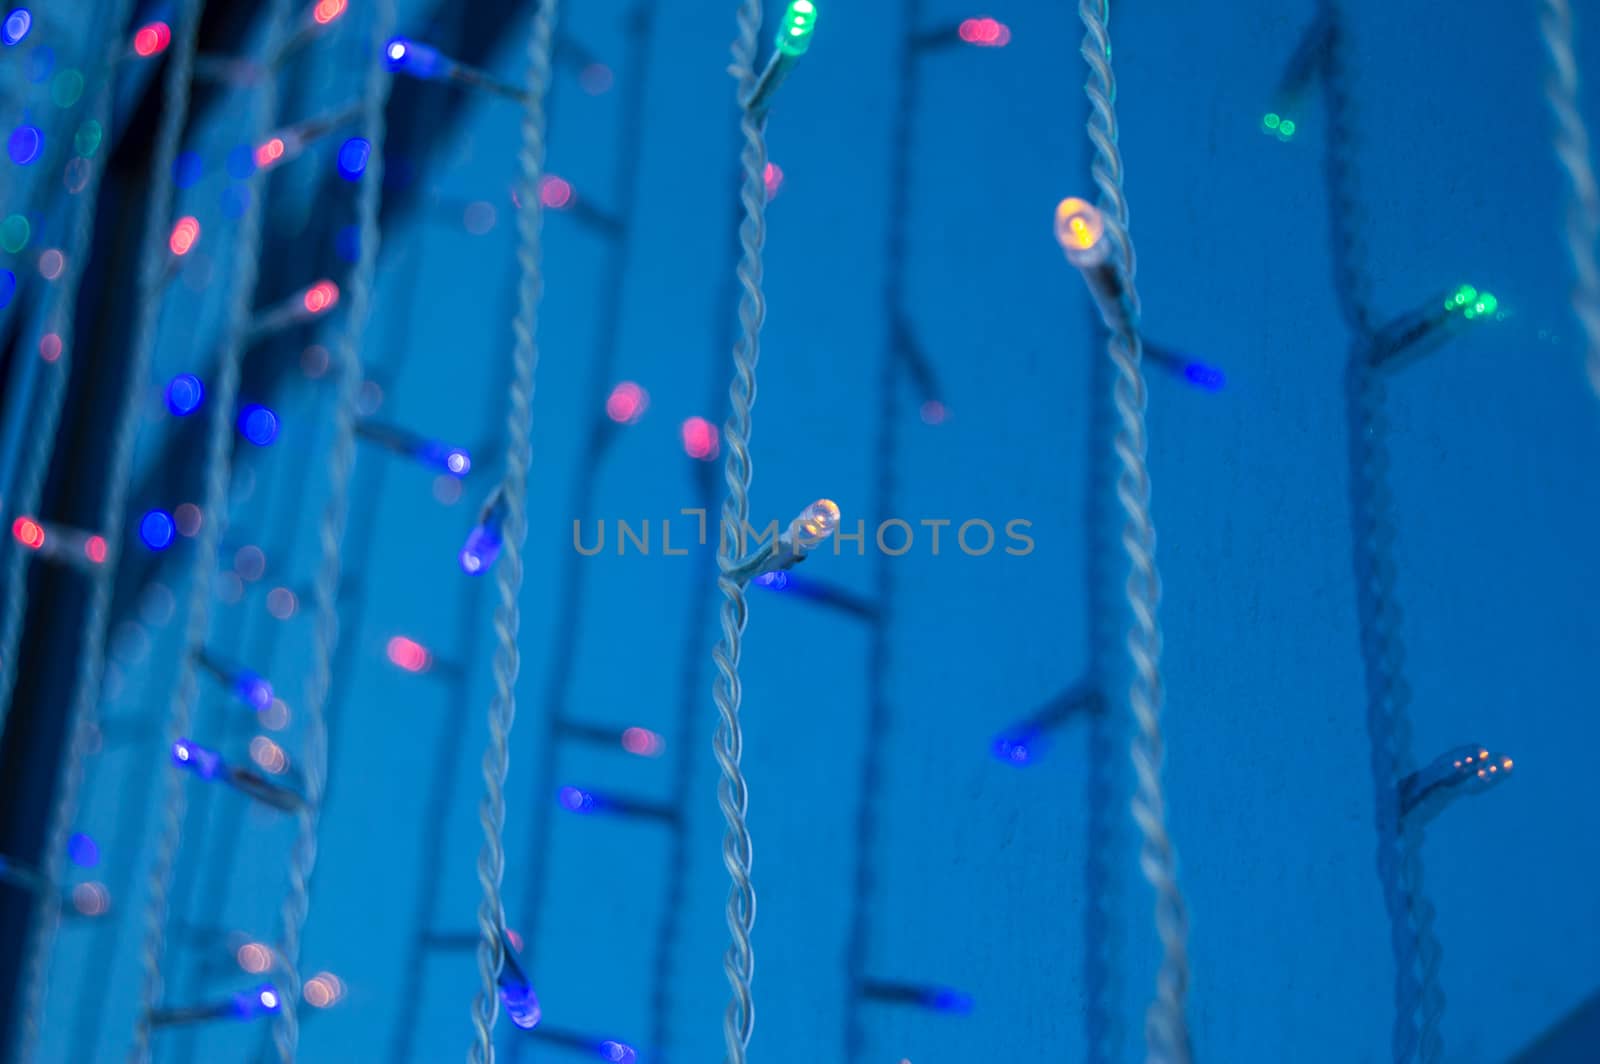 Festive decoration of office buildings, lights electric garland with lights.